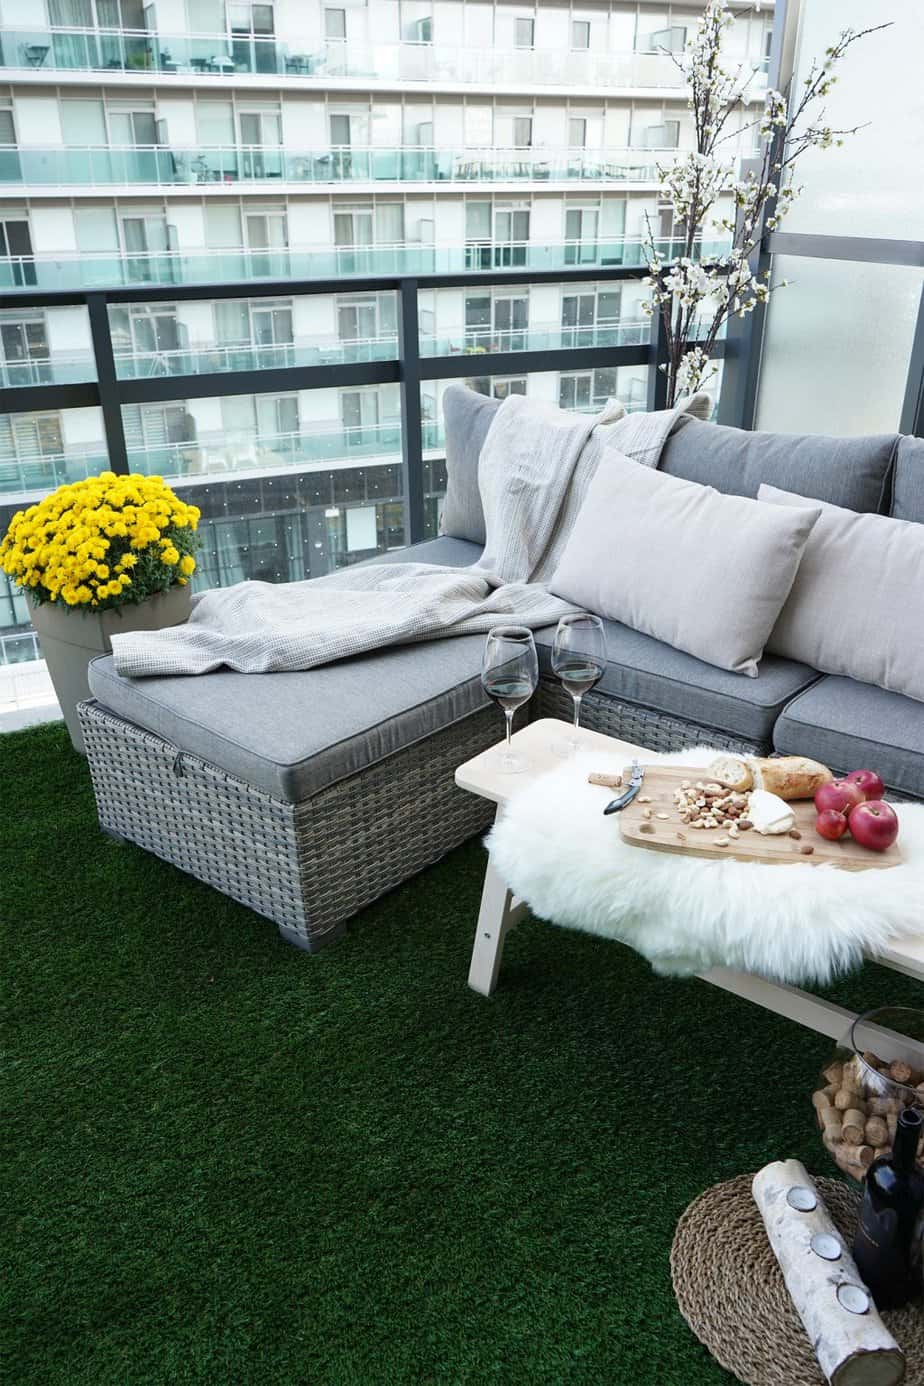 Artificial turf on a balcony with rattan furniture